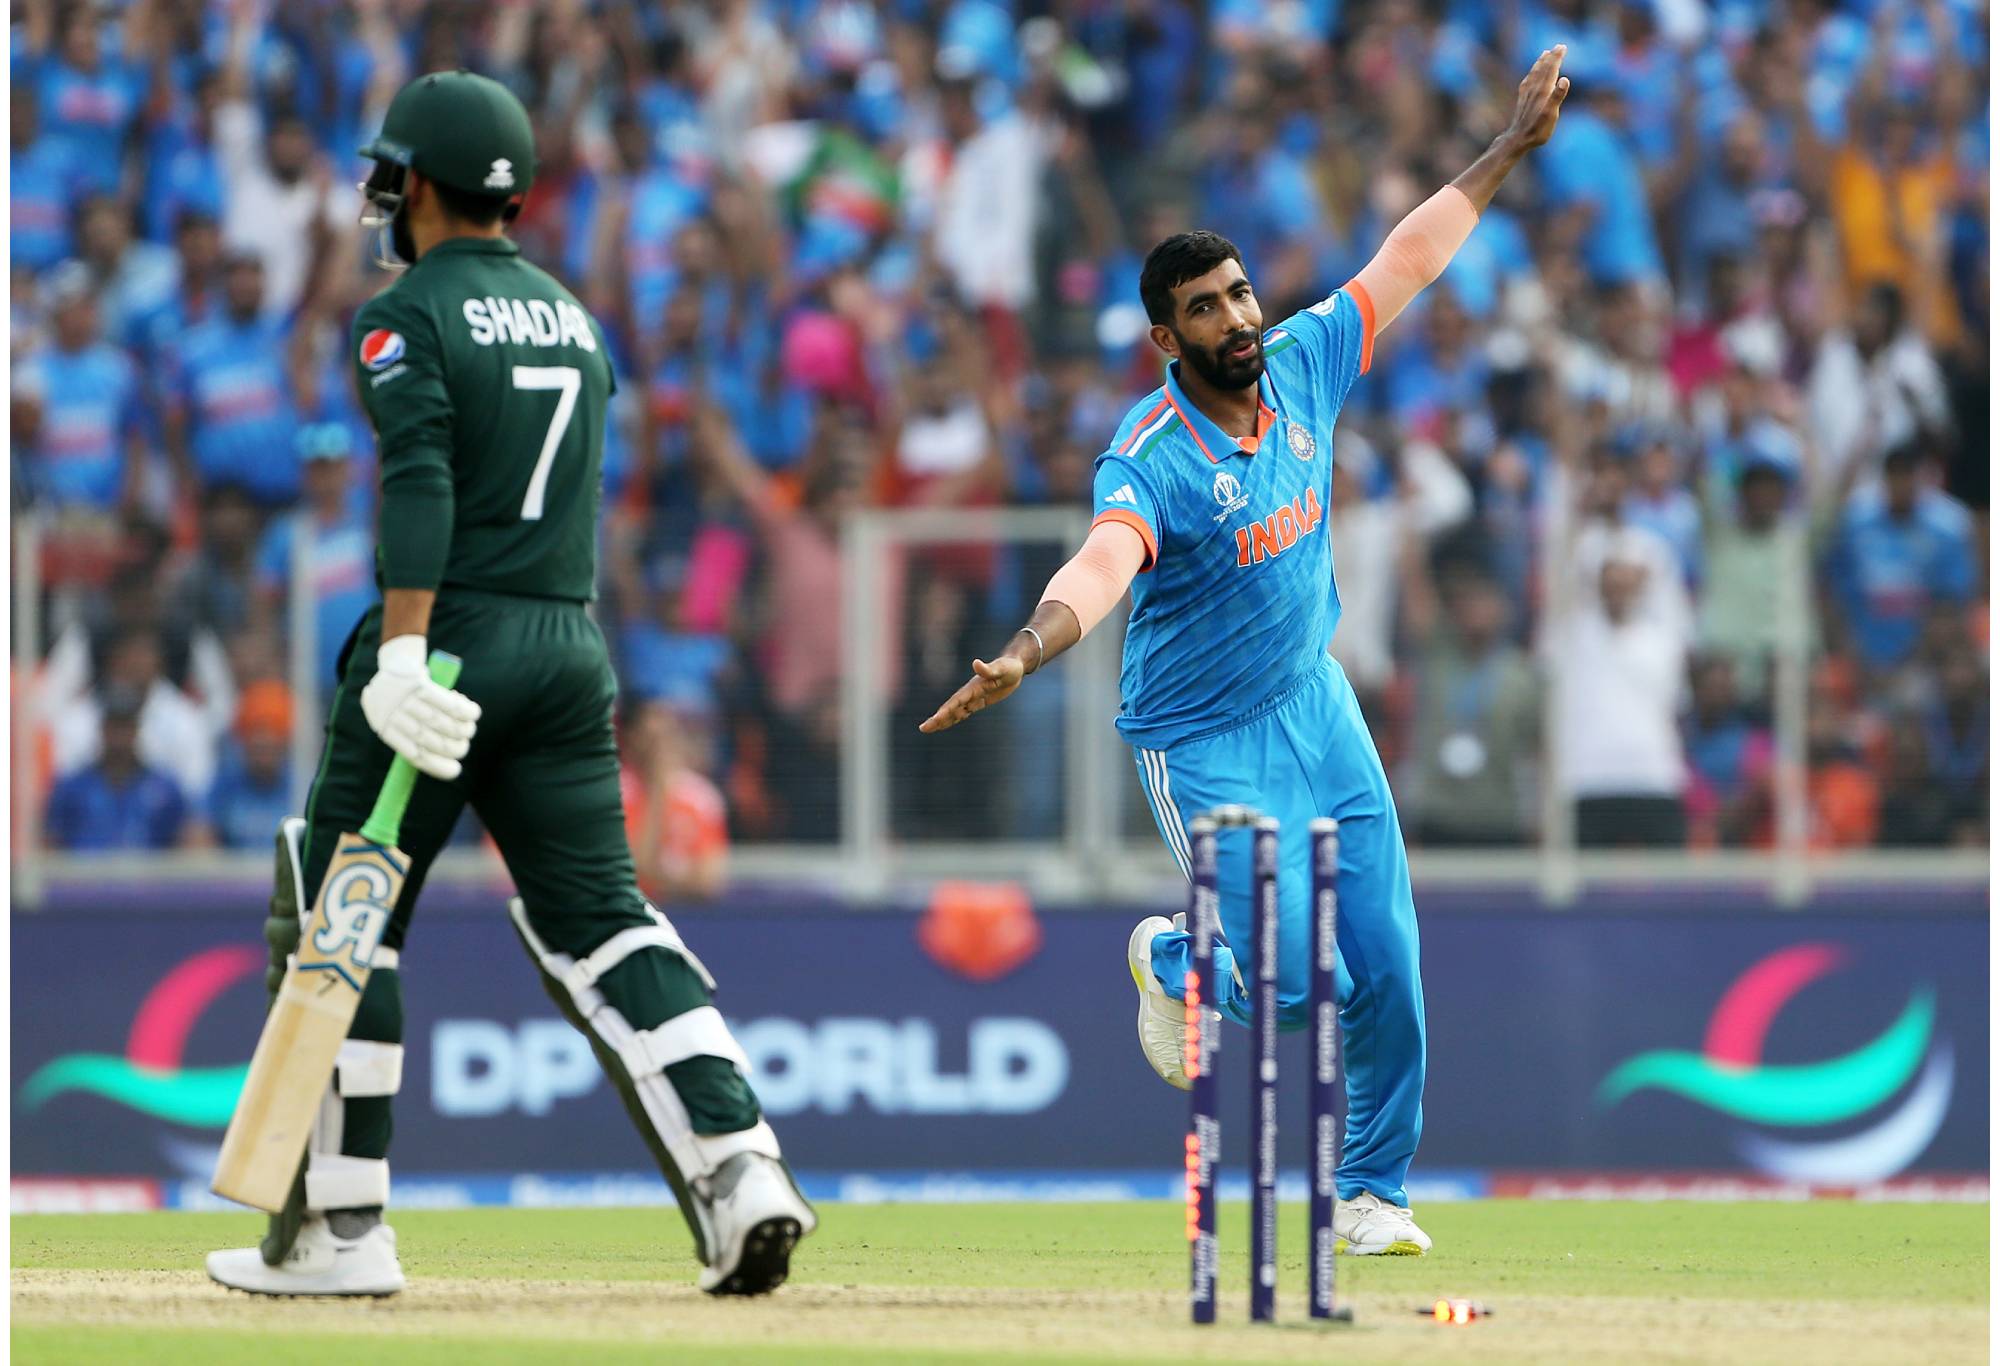 AHMEDABAD, INDIA - OCTOBER 14: Jasprit Bumrah of India celebrates the wicket of Shadab Khan of Pakistan during the ICC Men's Cricket World Cup India 2023 between India and Pakistan at Narendra Modi Stadium on October 14, 2023 in Ahmedabad, India. (Photo by Surjeet Yadav-ICC/ICC via Getty Images)